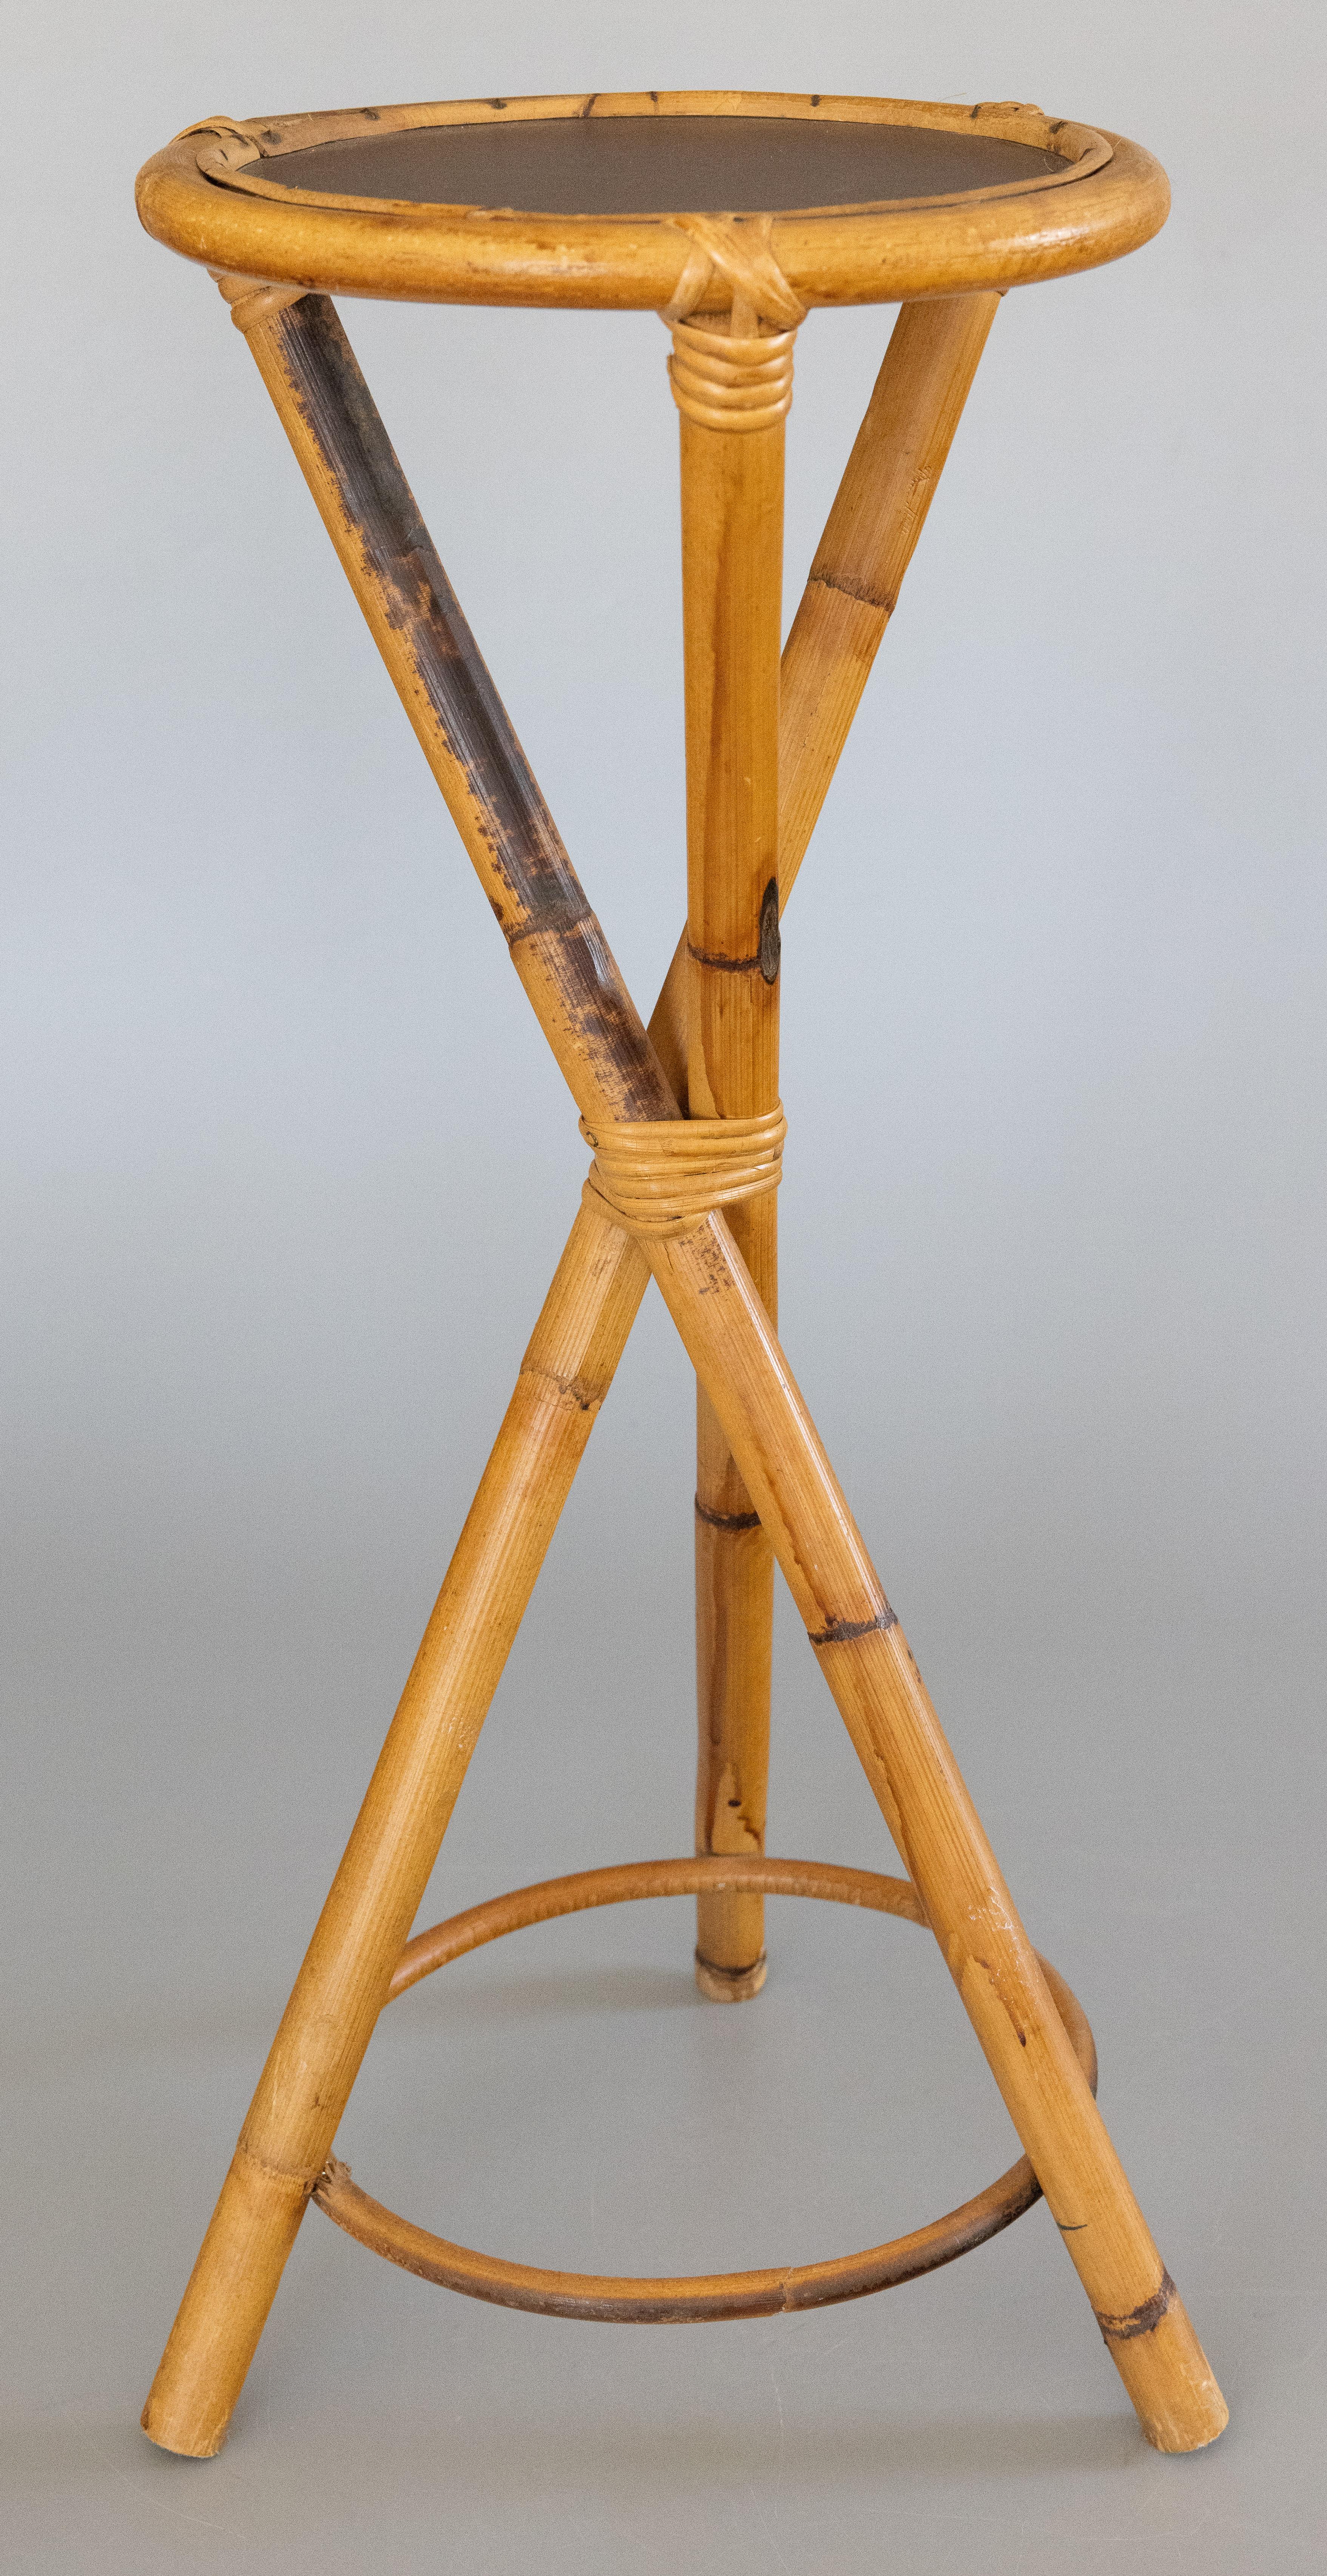 A stylish vintage Italian bamboo display plant stand or tall side table, circa 1950. Original 